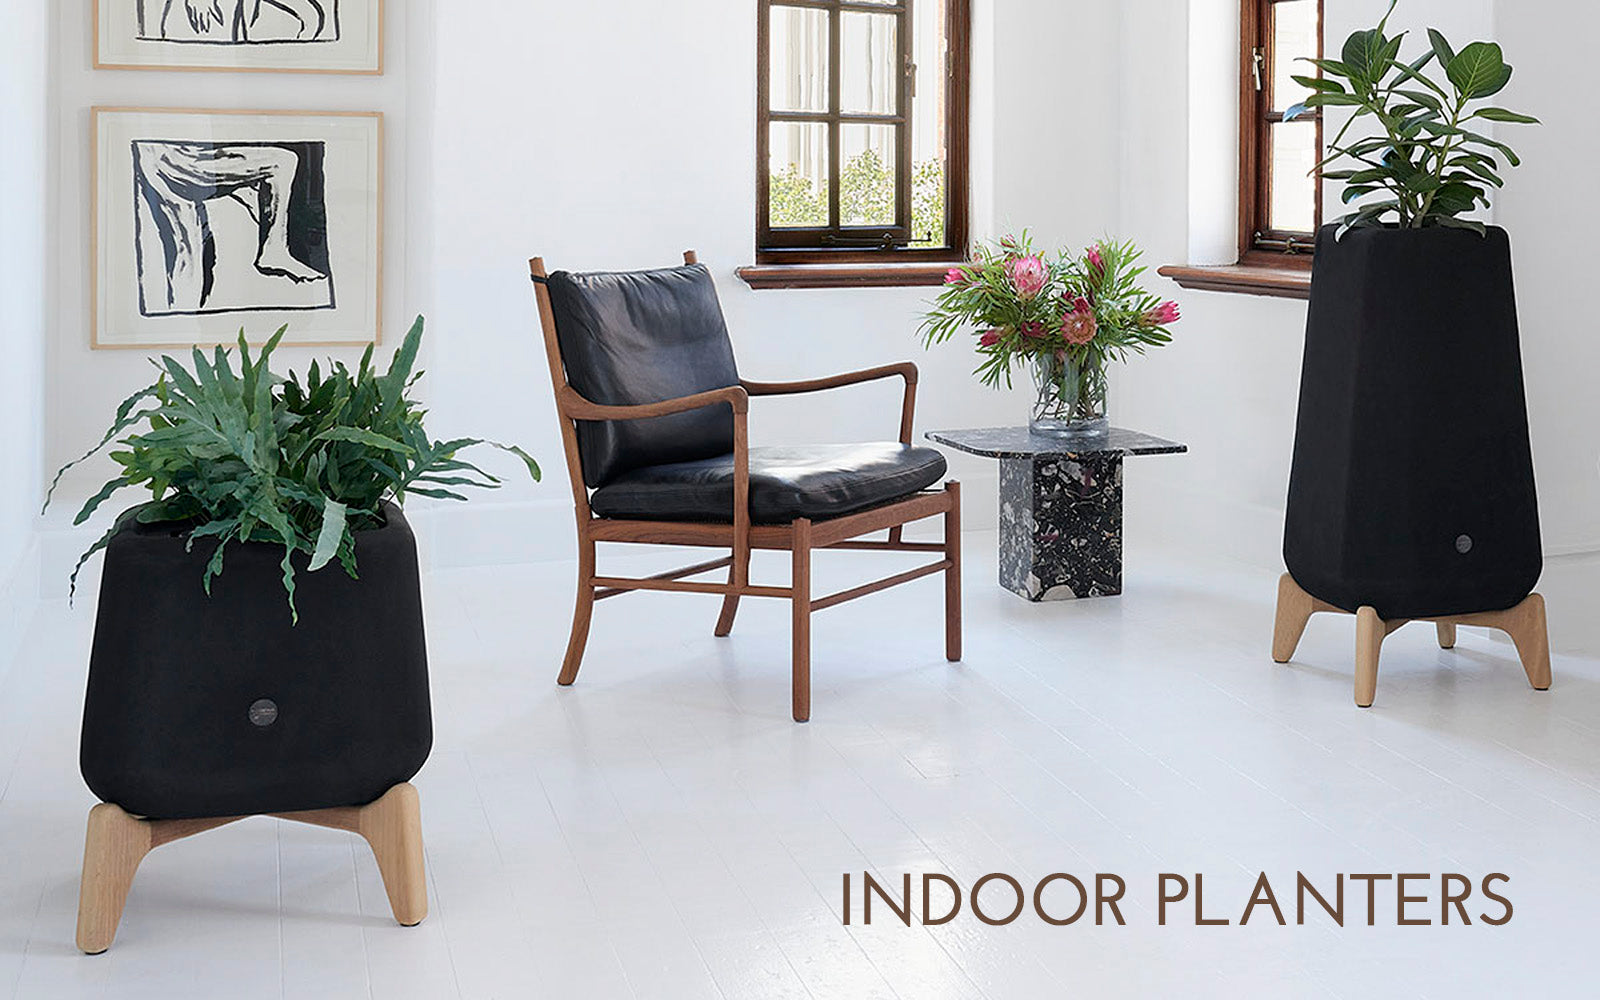 Allred Collaborative's Indoor Planters Collections